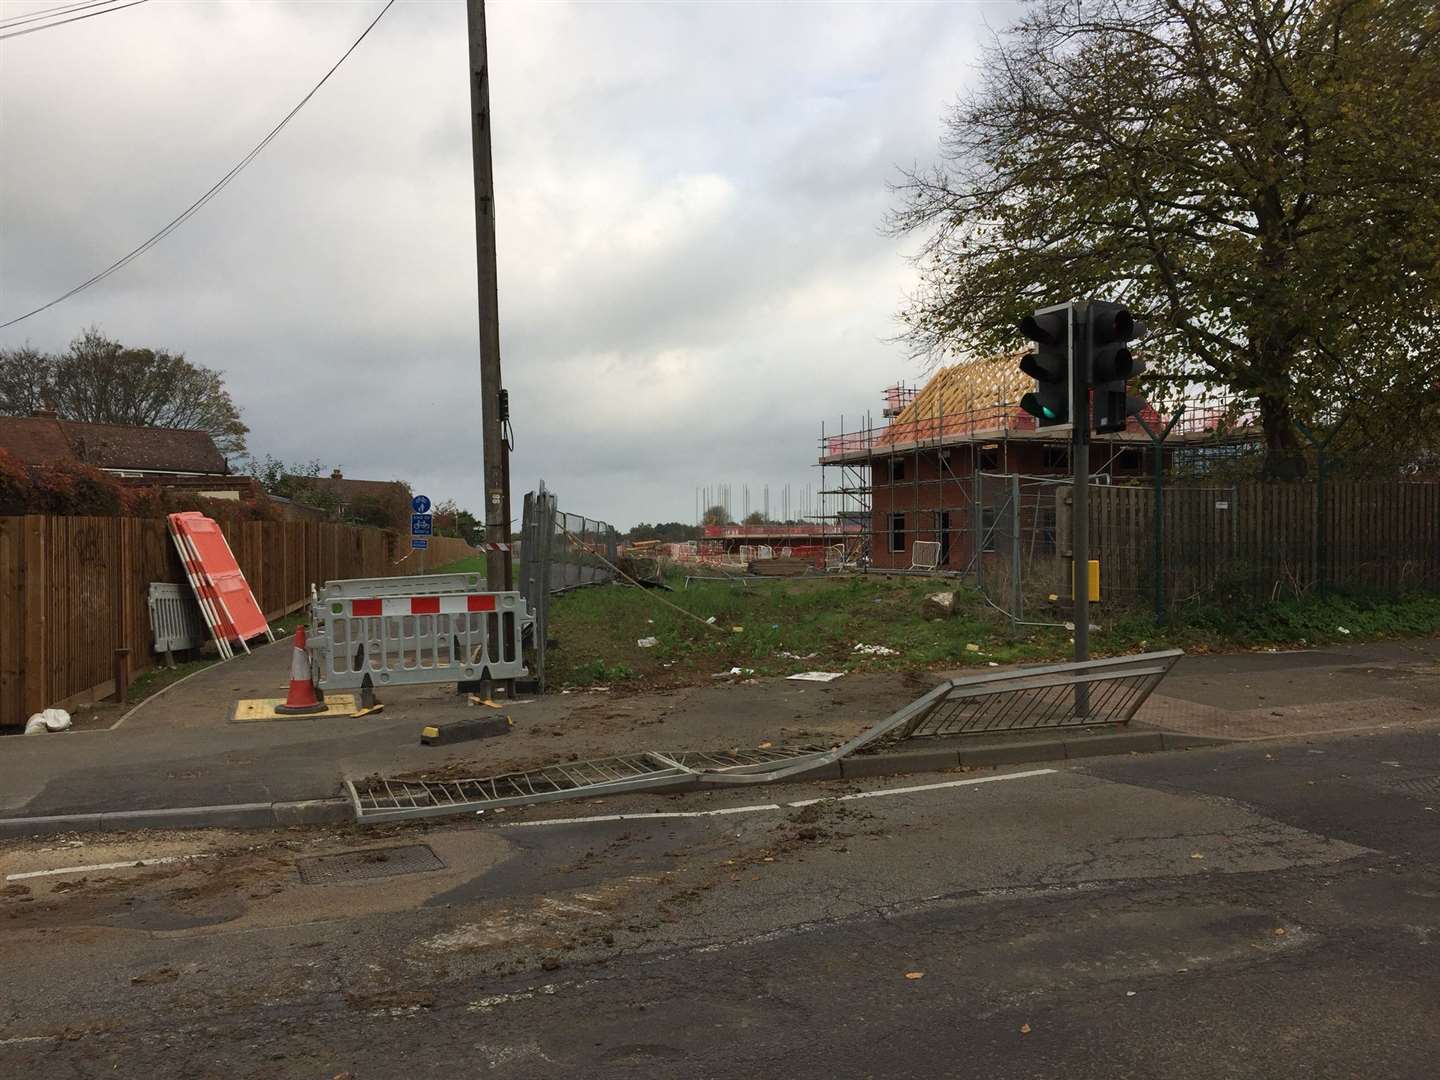 A fence linking to the nearby Taylor Wimpey Royal Parade development has been smashed down